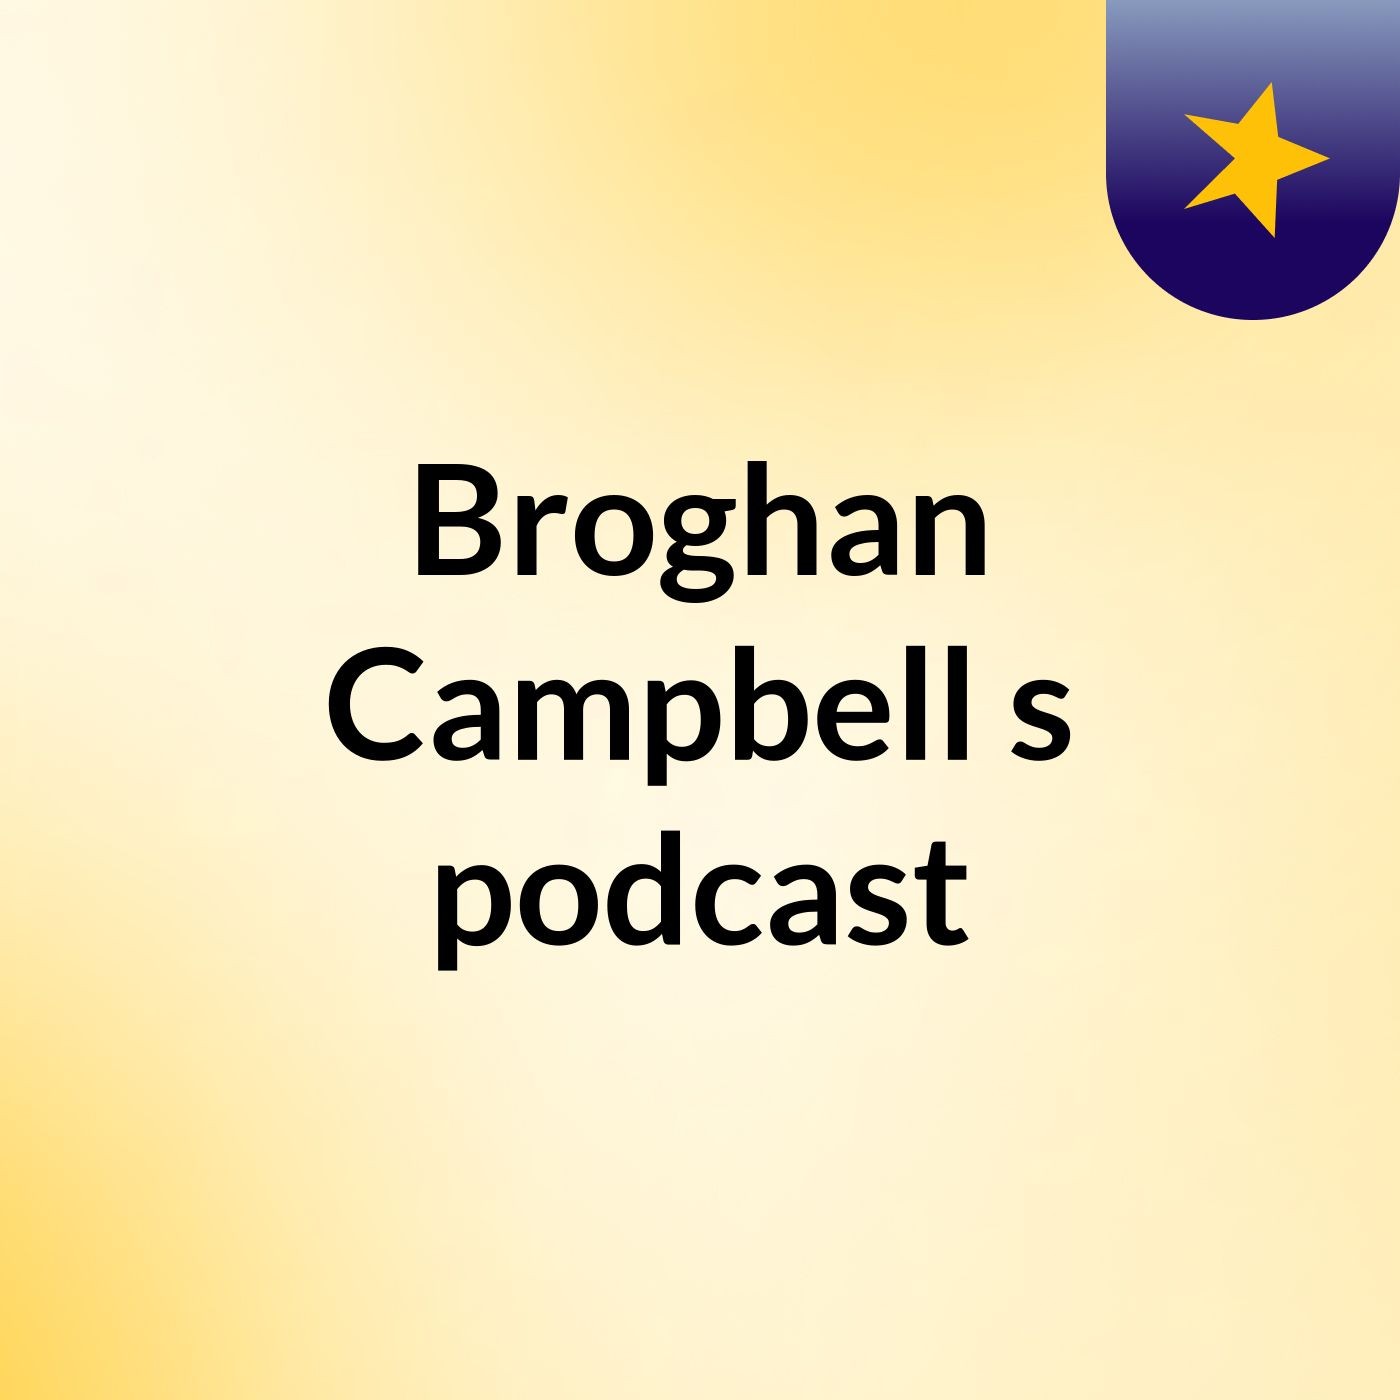 Episode 2 - Broghan Campbell's podcast